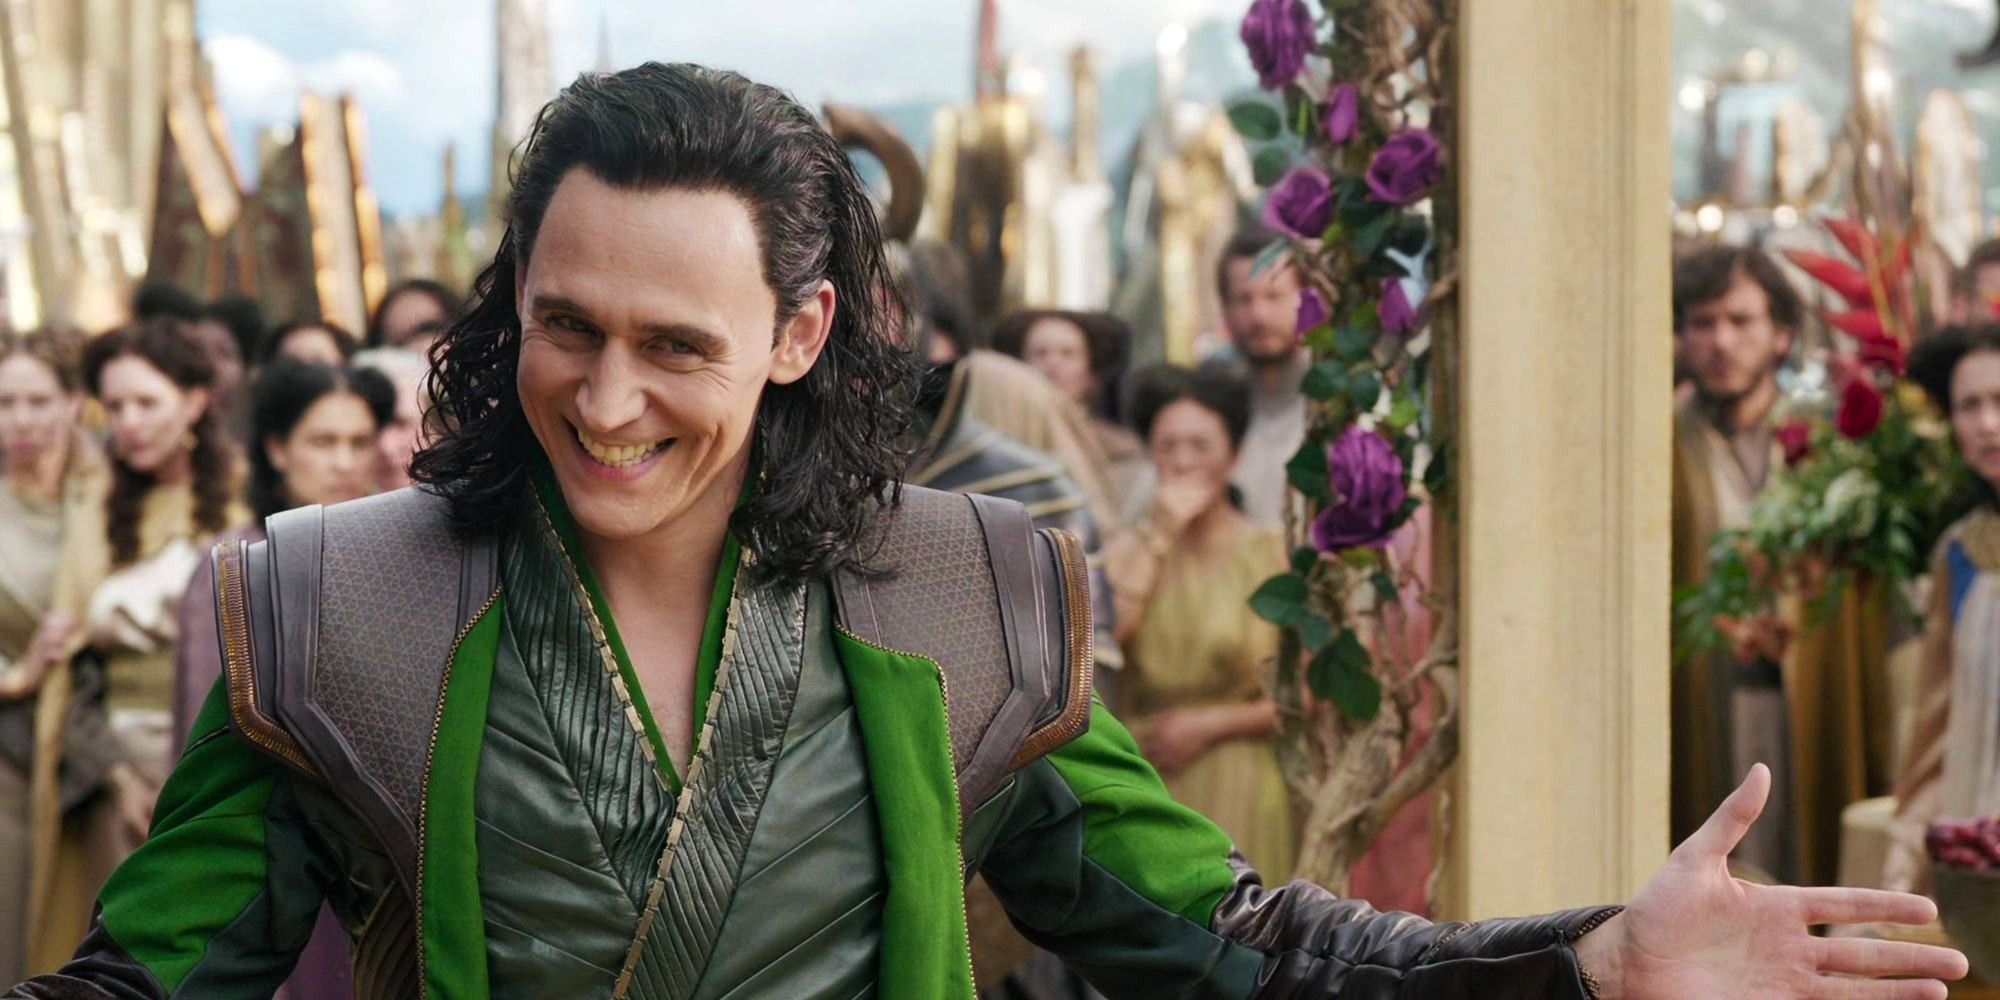 Loki smiling mischievously after pretending to be Odin in Thor: Ragnarok